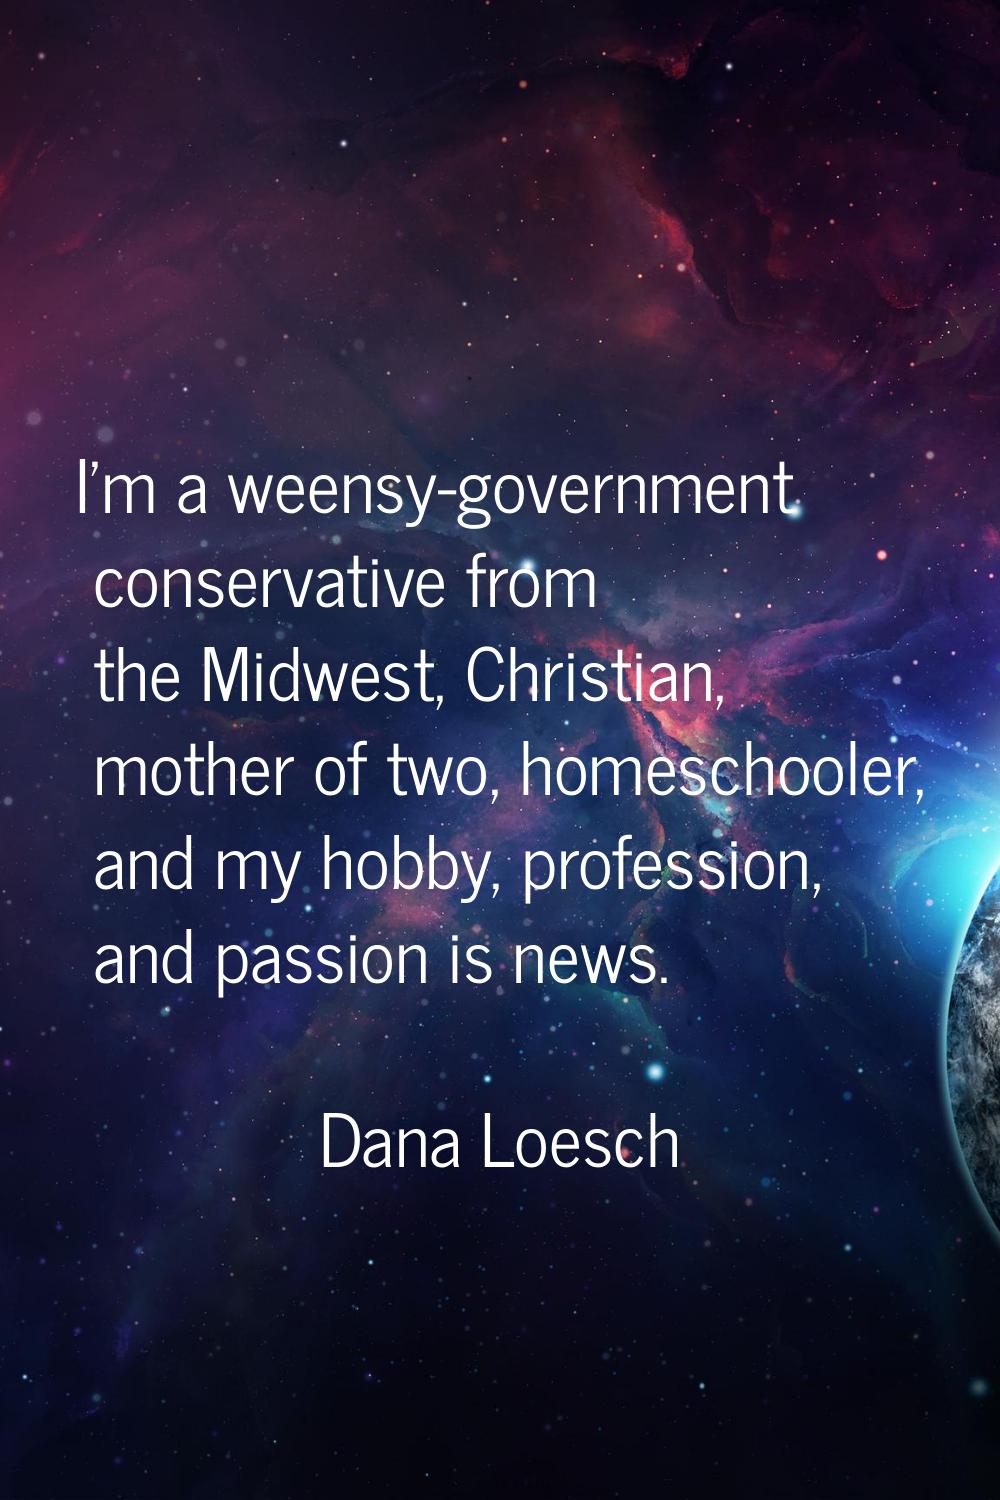 I'm a weensy-government conservative from the Midwest, Christian, mother of two, homeschooler, and 